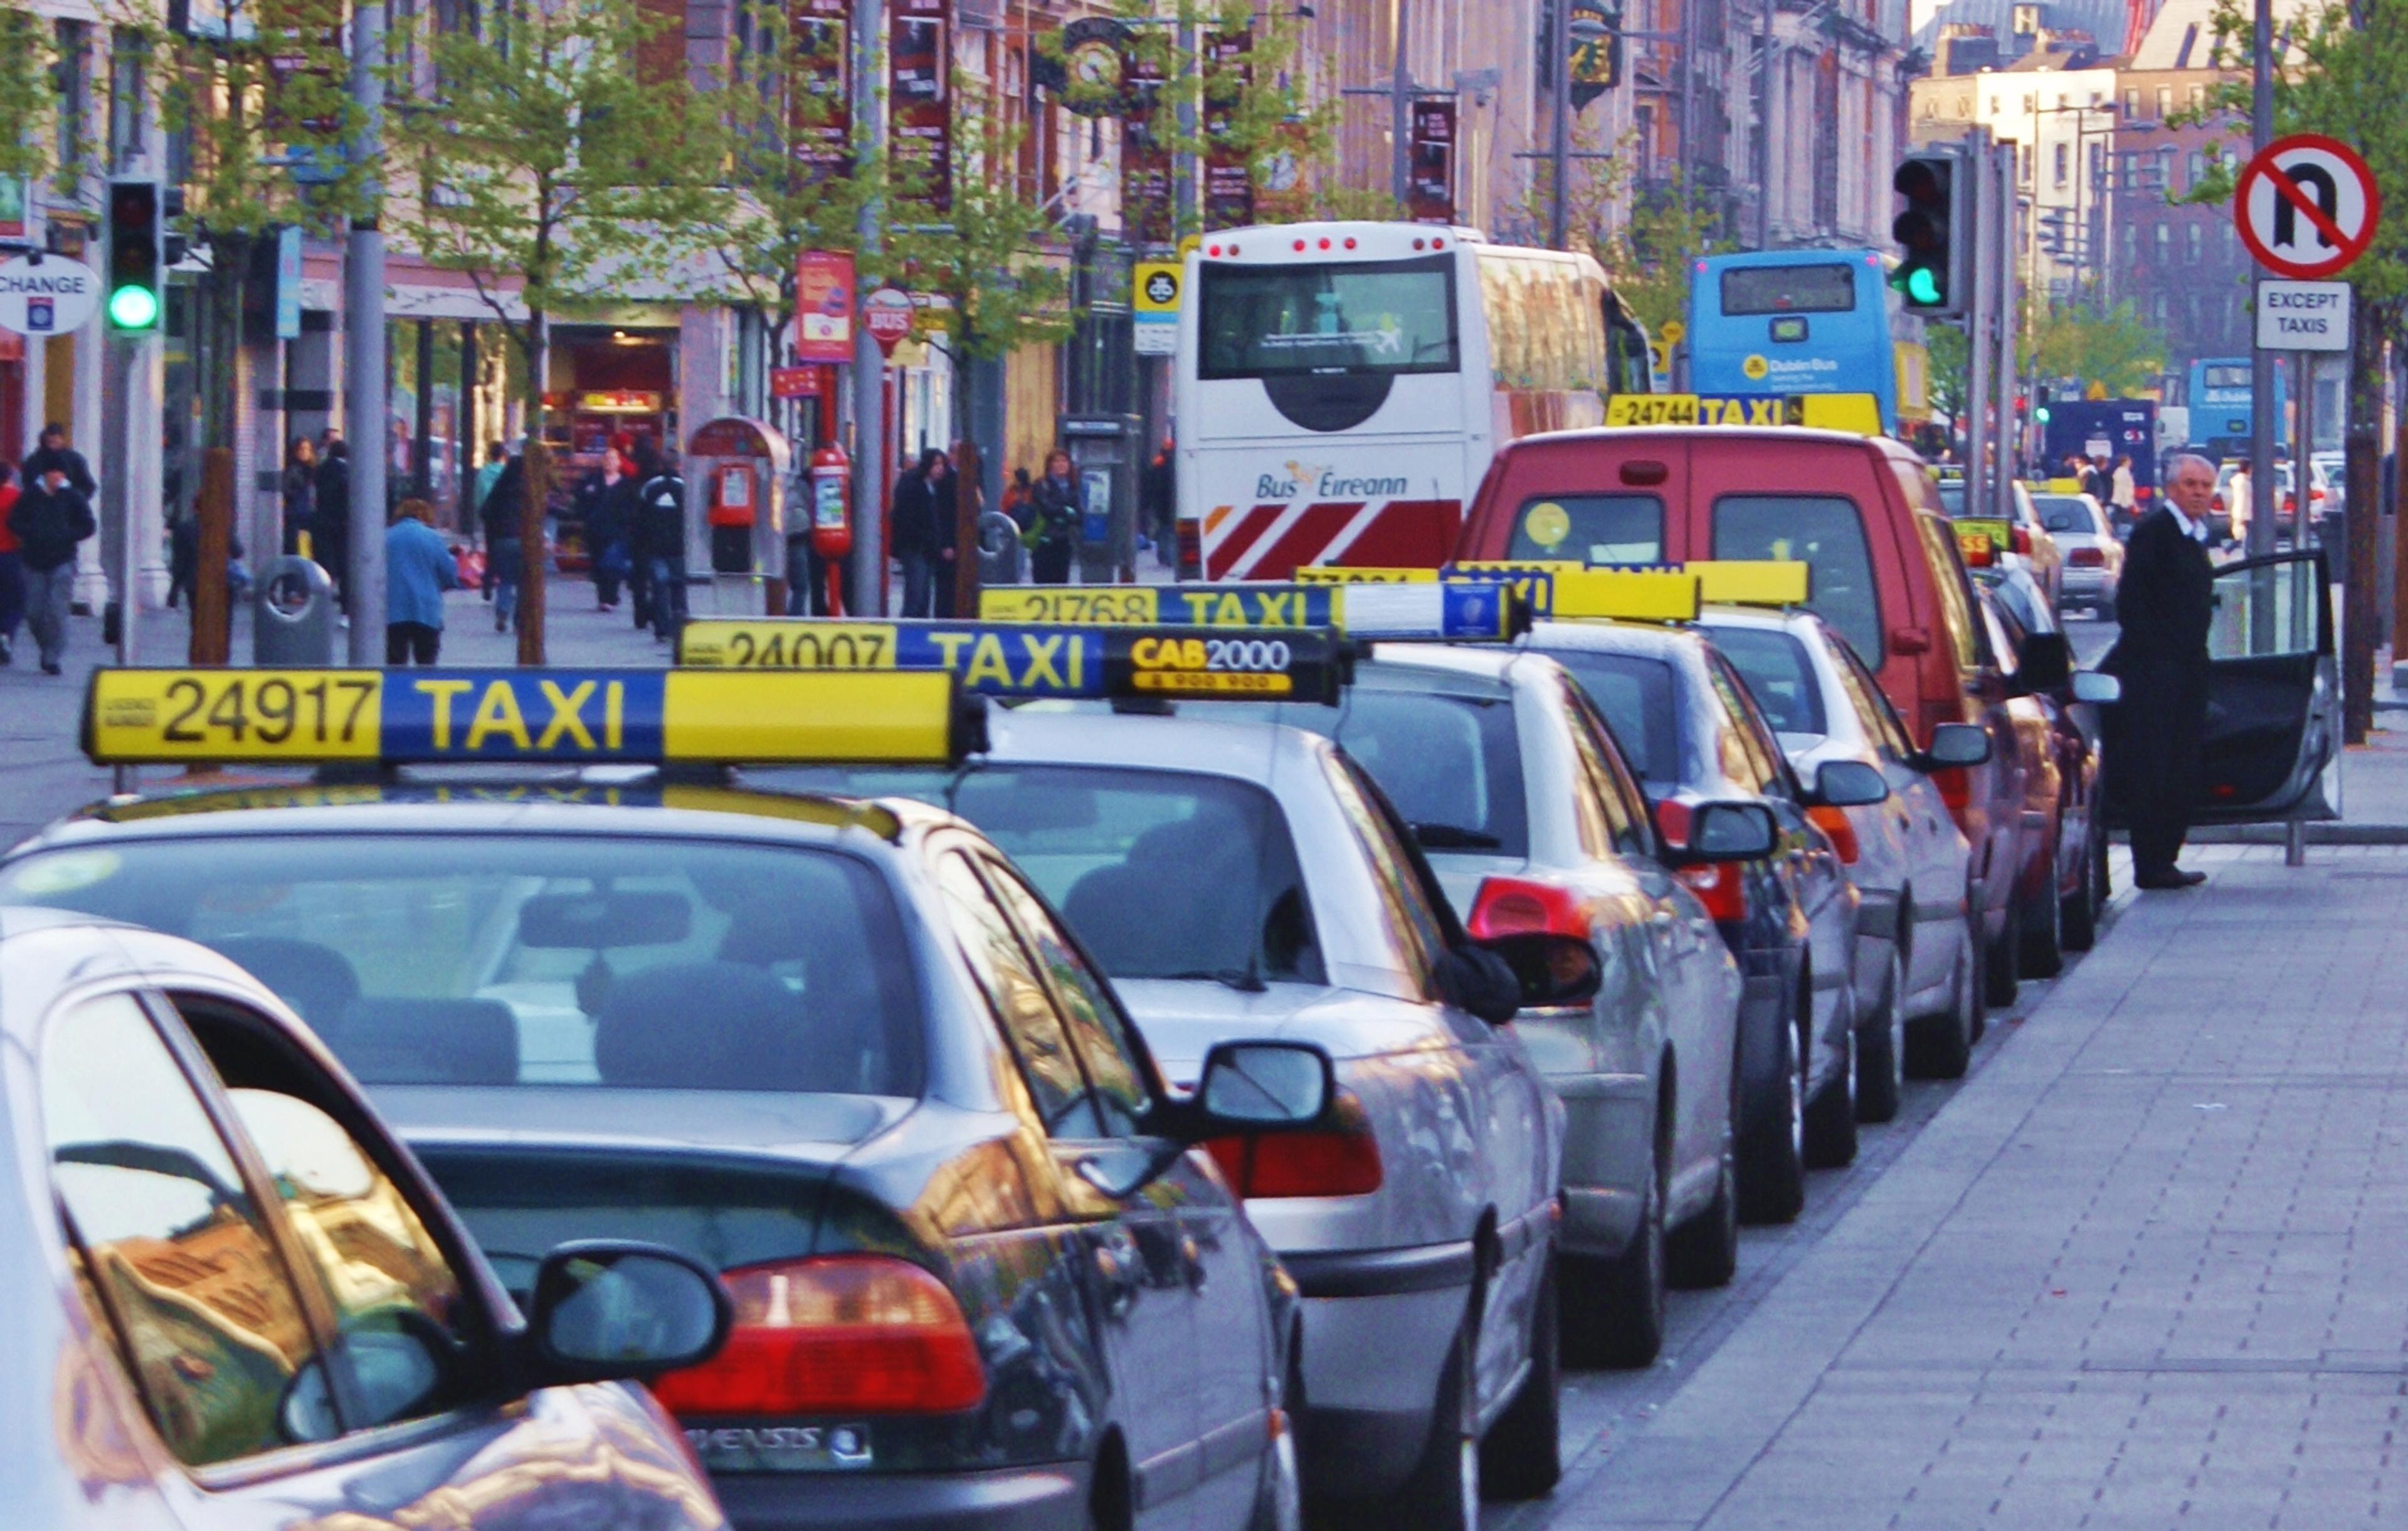 How to get started with taxi work in Ireland